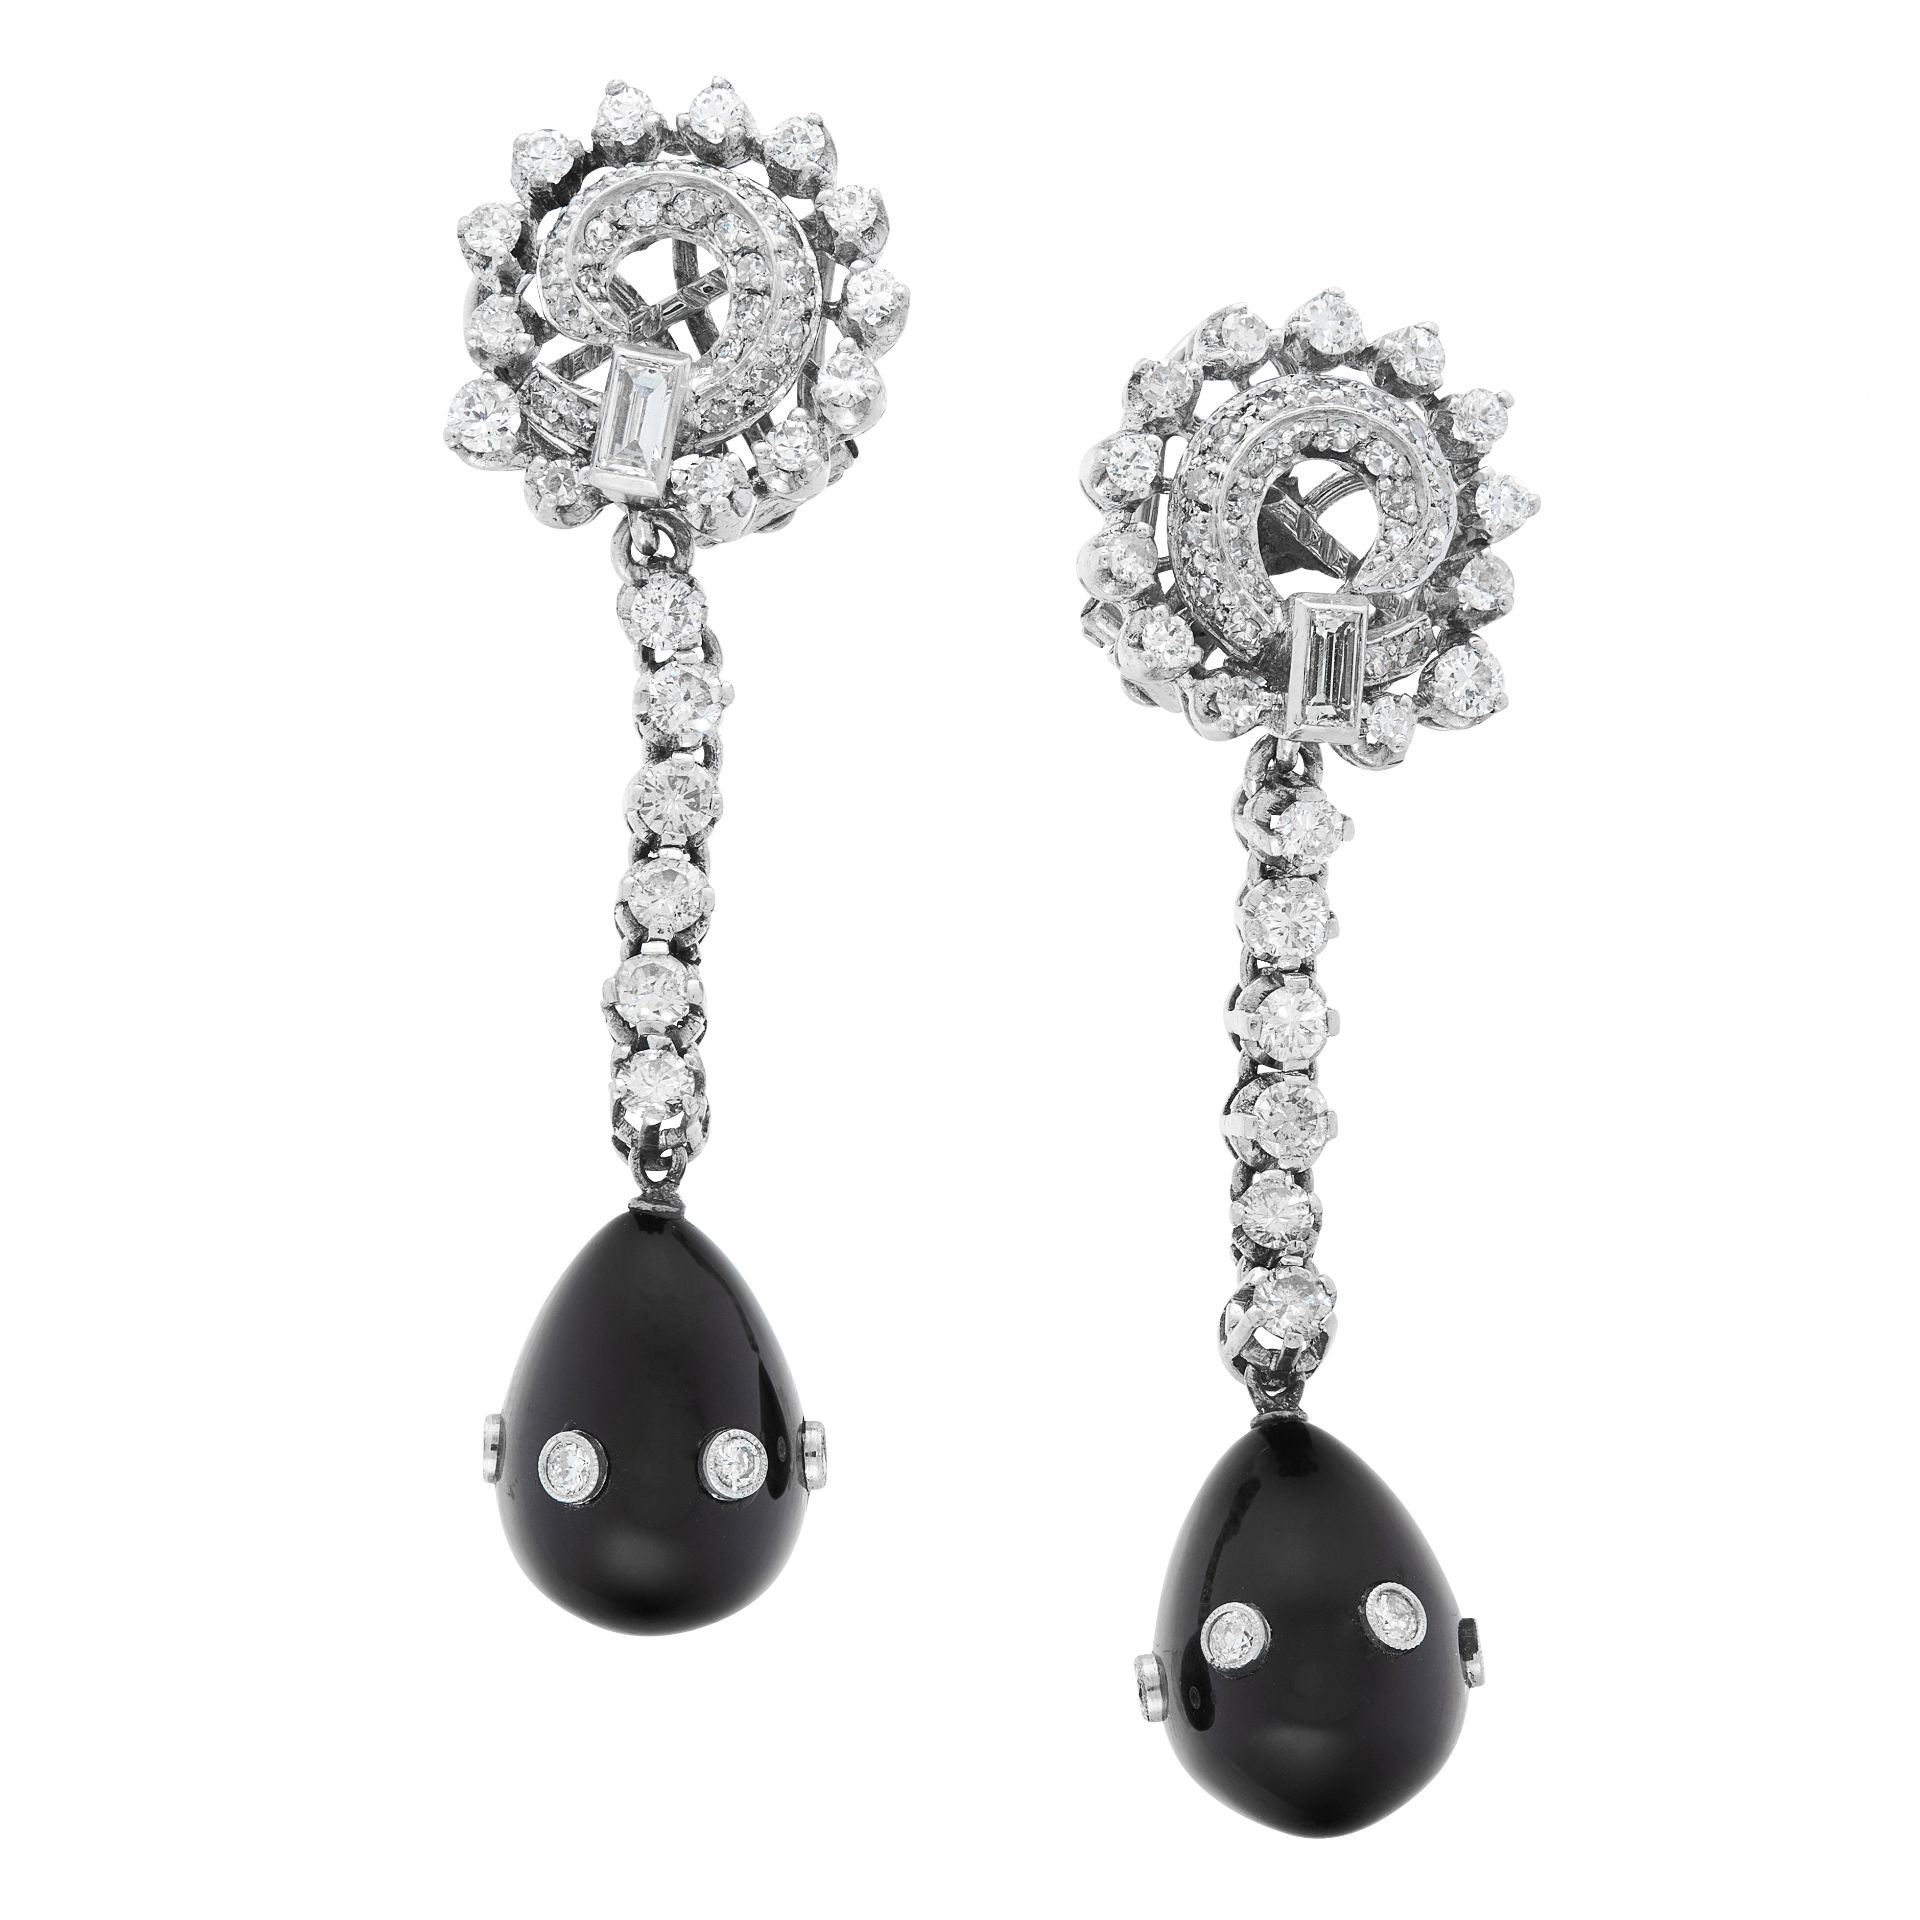 A PAIR OF ONYX AND DIAMOND PENDENT CLIP EARRINGS in 18ct white gold and platinum, of day and night